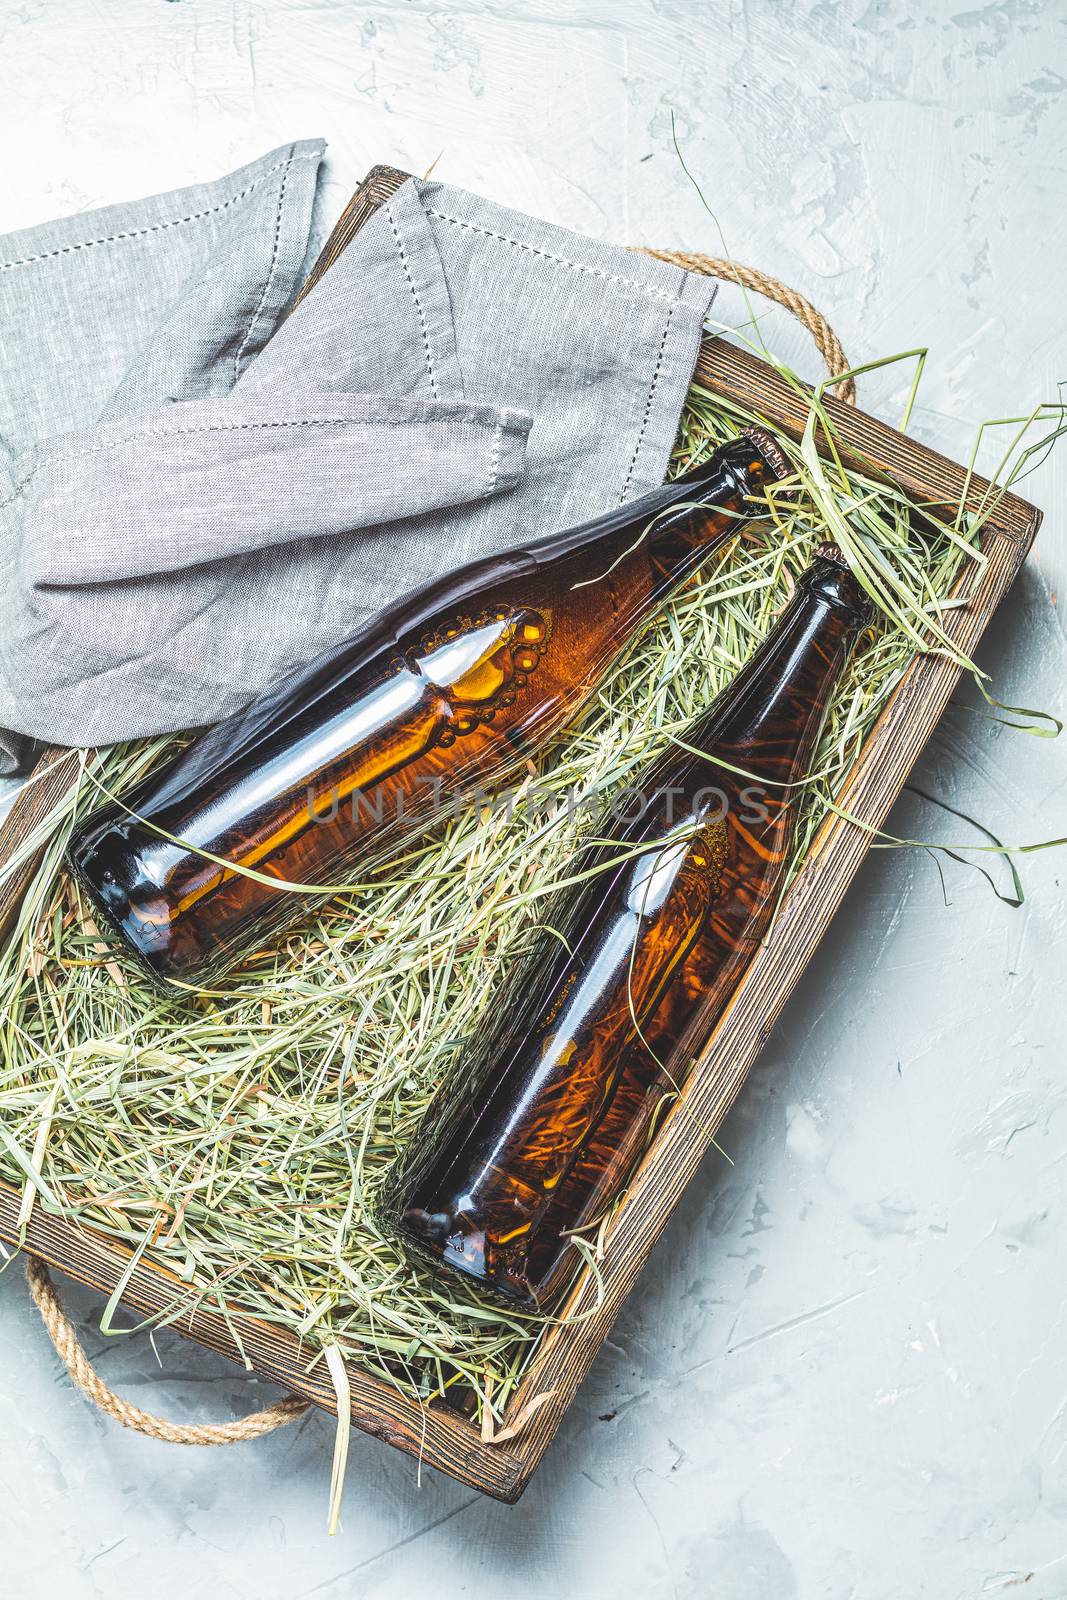 Craft beer with dried grass in wooden box on gray concrete surface background